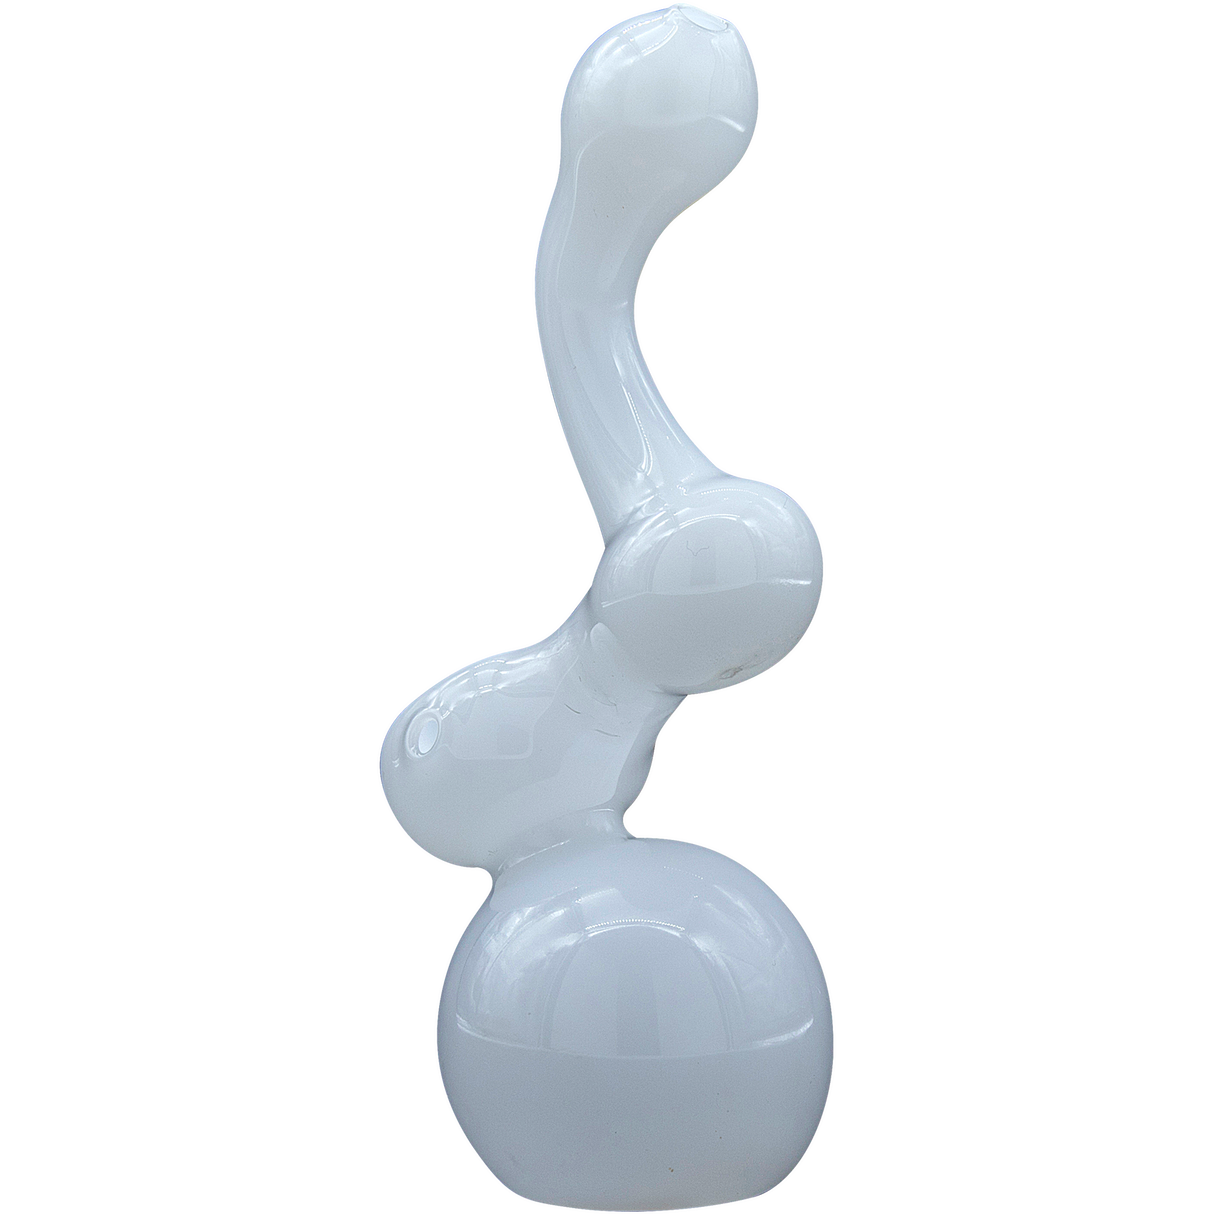 LA Pipes "Ivory Sherlock" White Glass Bubbler Pipe - 6" Tall, USA Made, For Dry Herbs